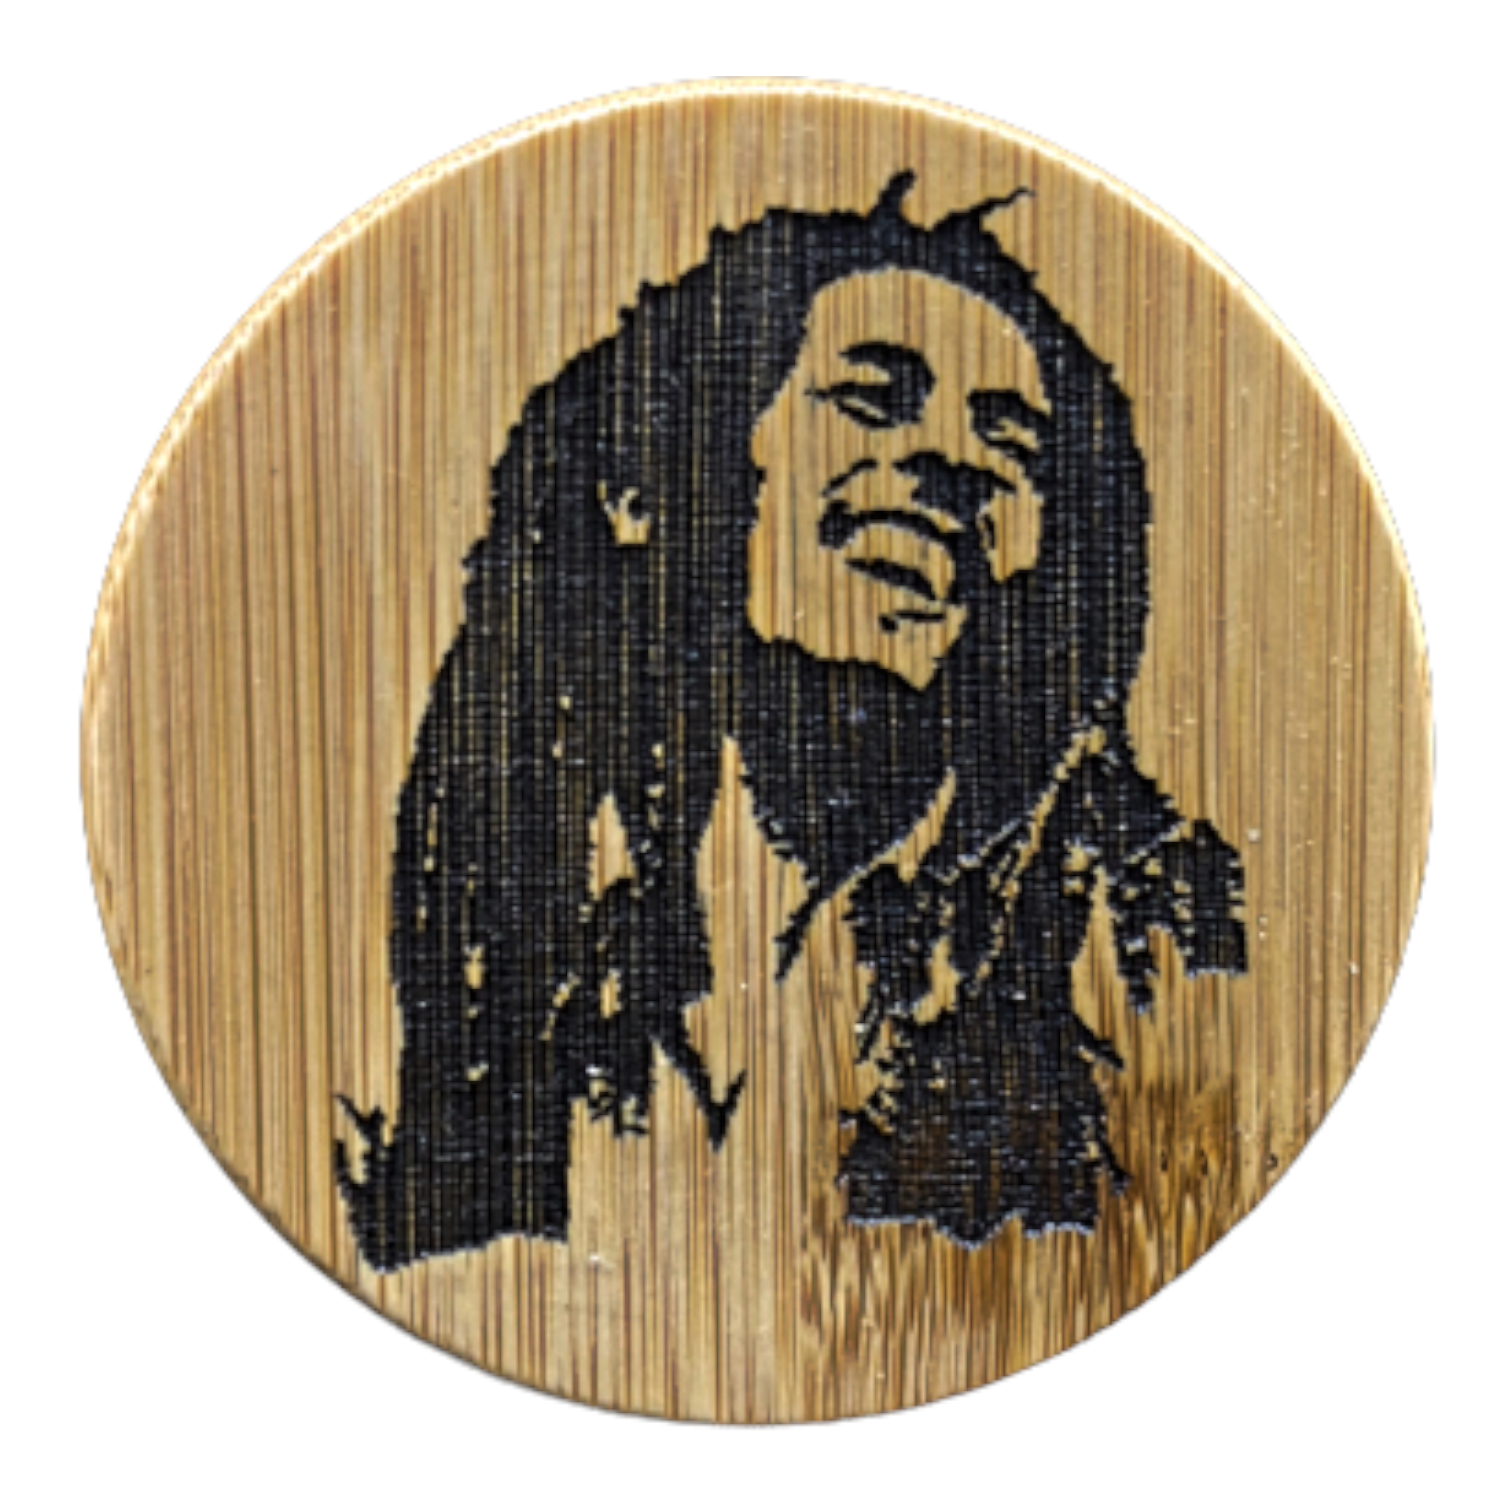 Tahoe Grinders - Large Two Piece Bamboo Grinder With Bob Marley